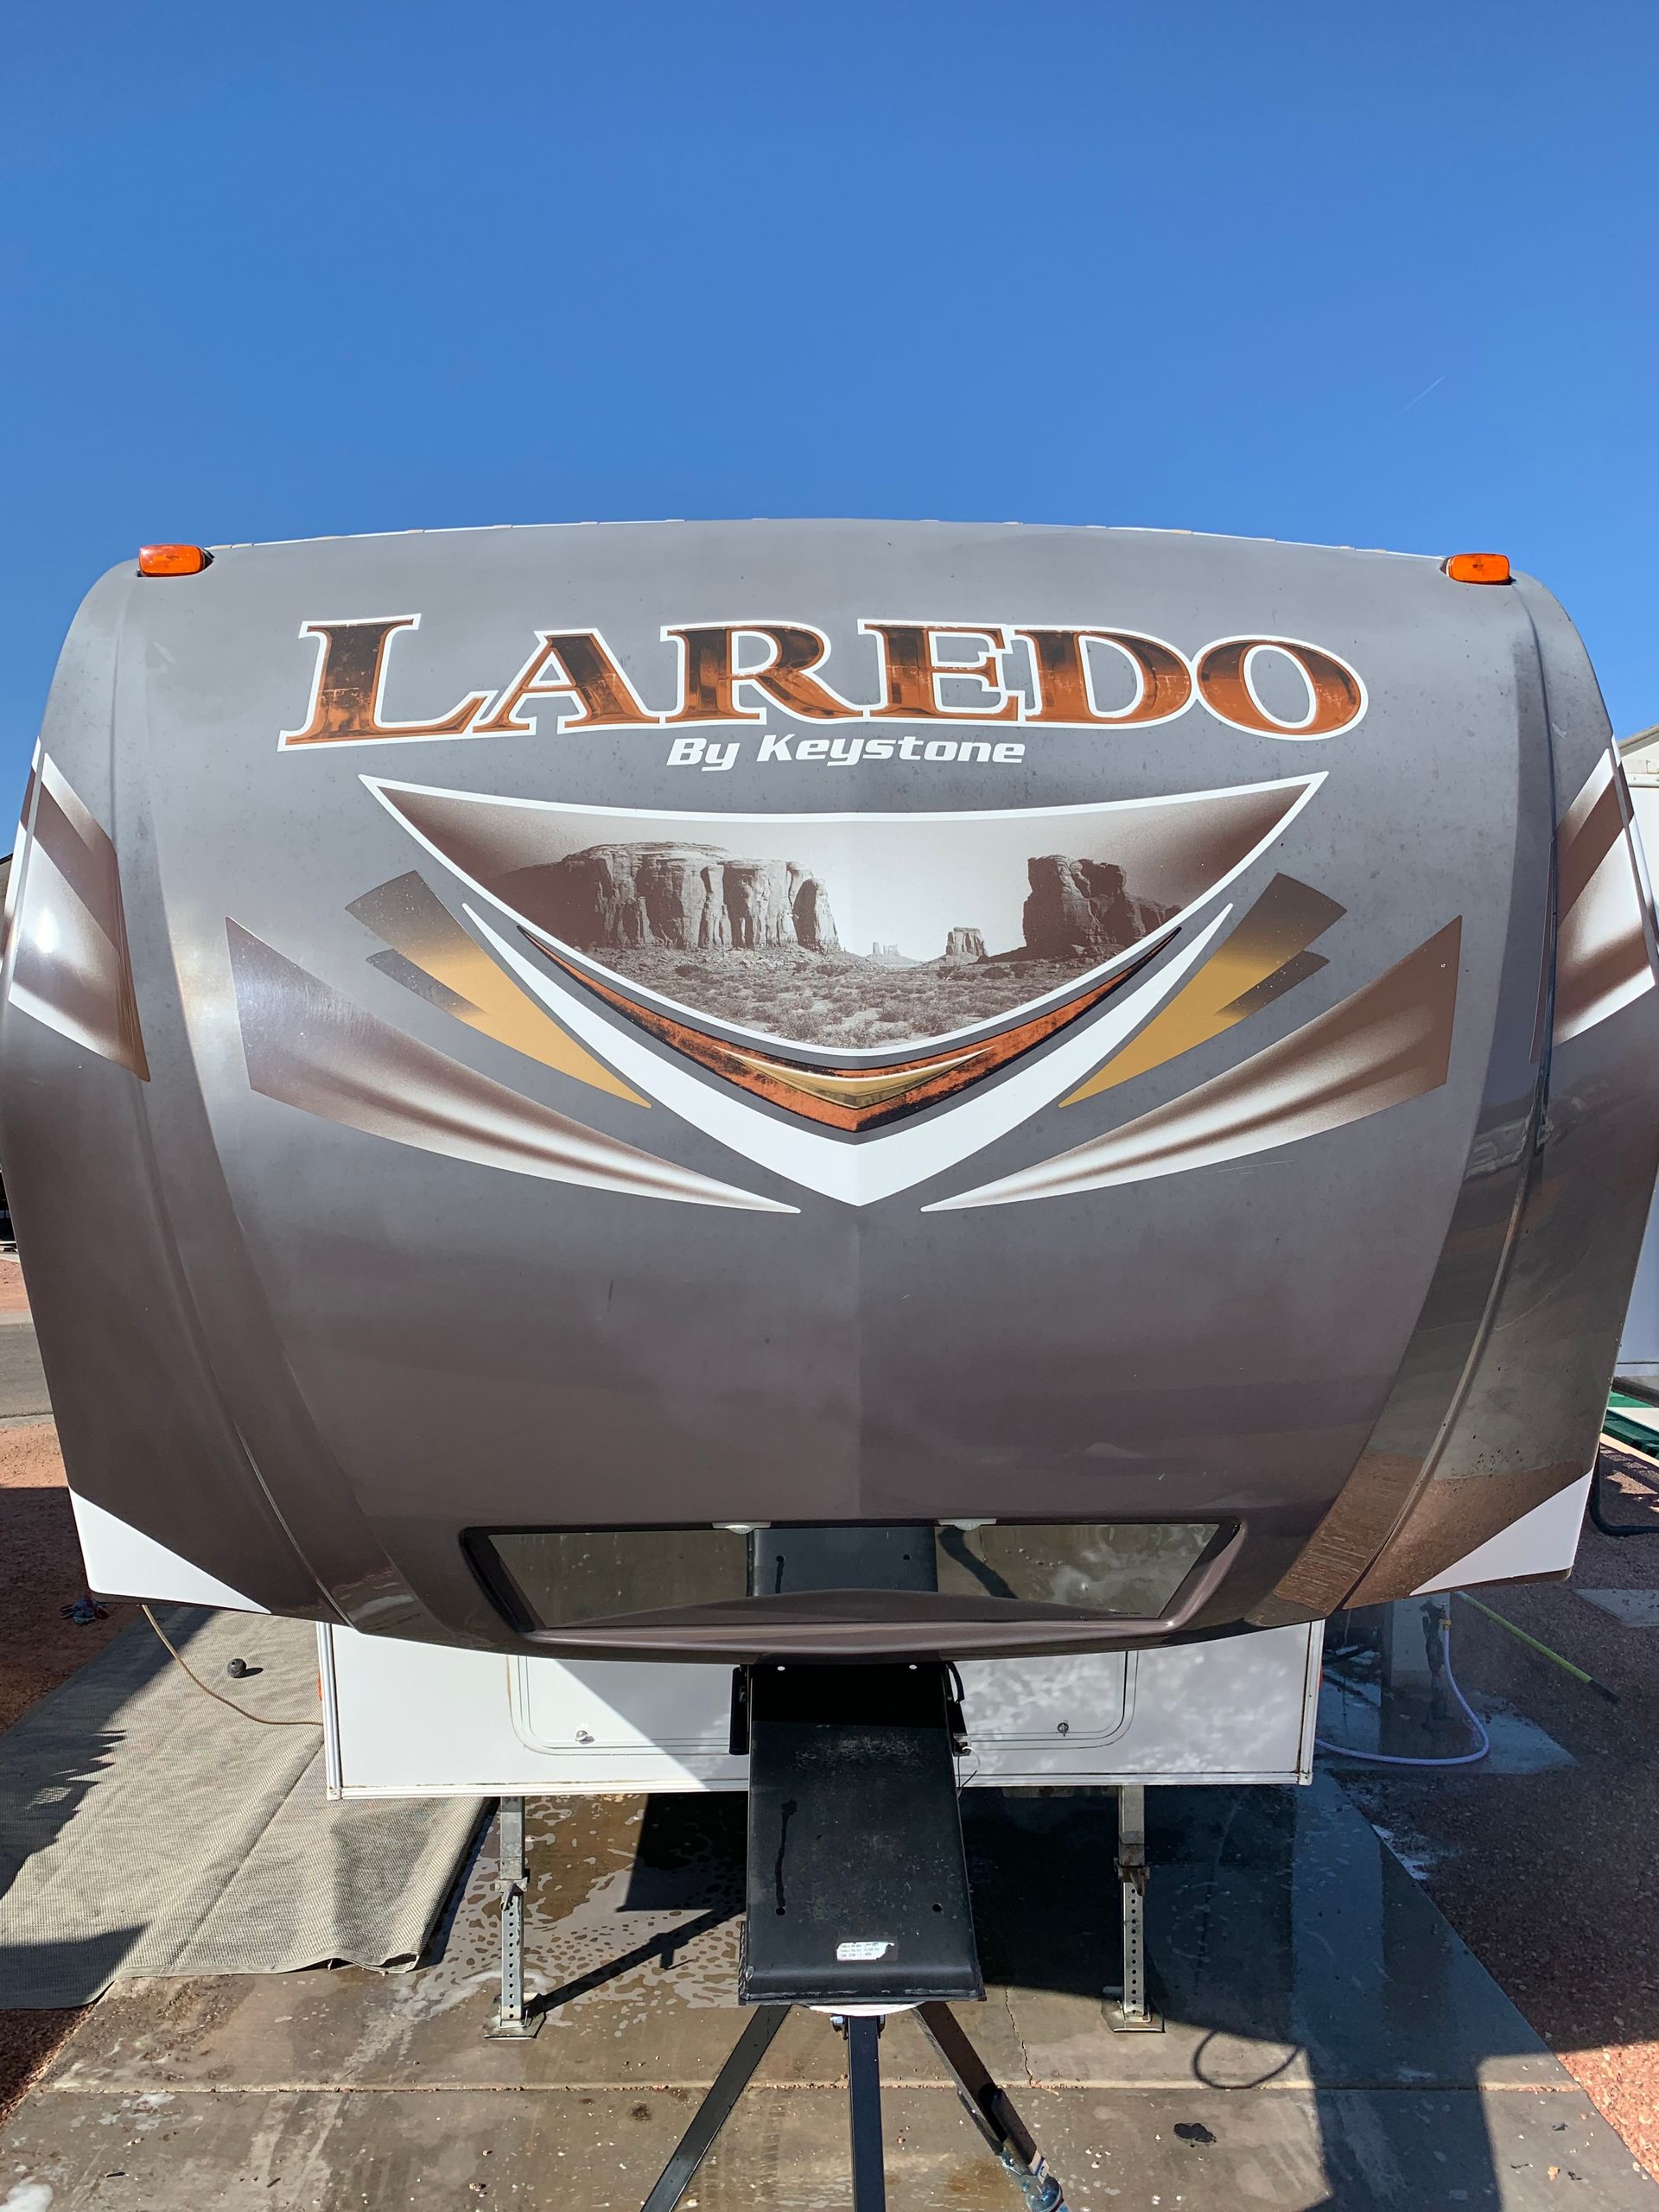 A laredo rv is parked on the side of the road.